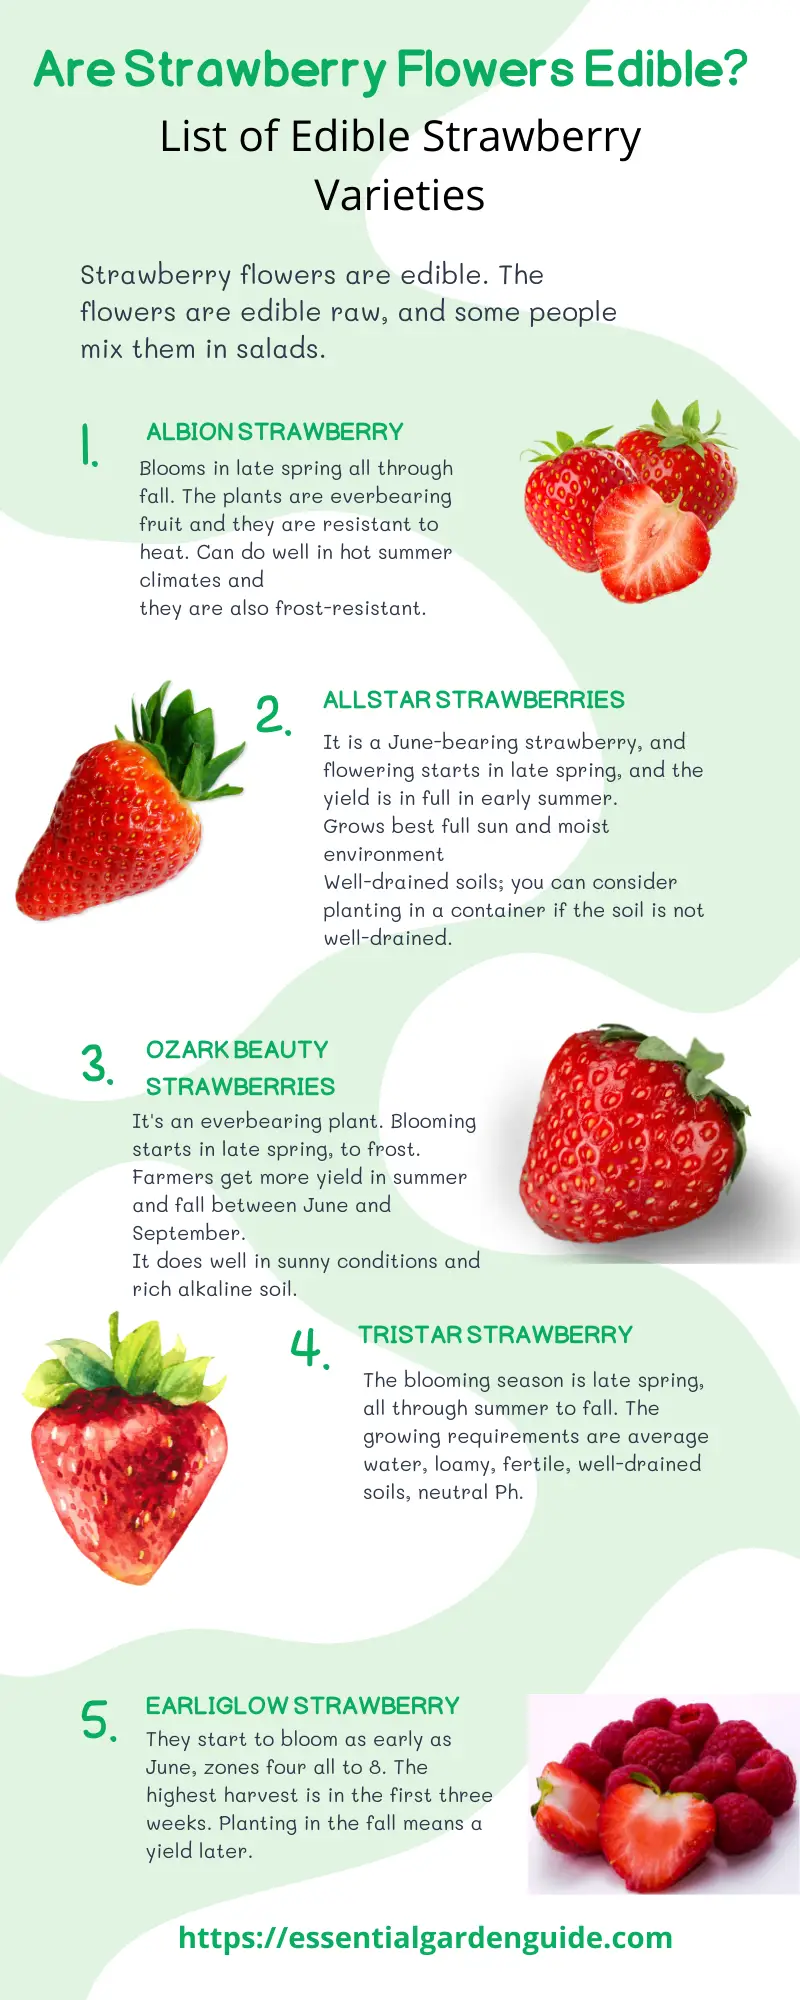 Don't eat first year strawberries